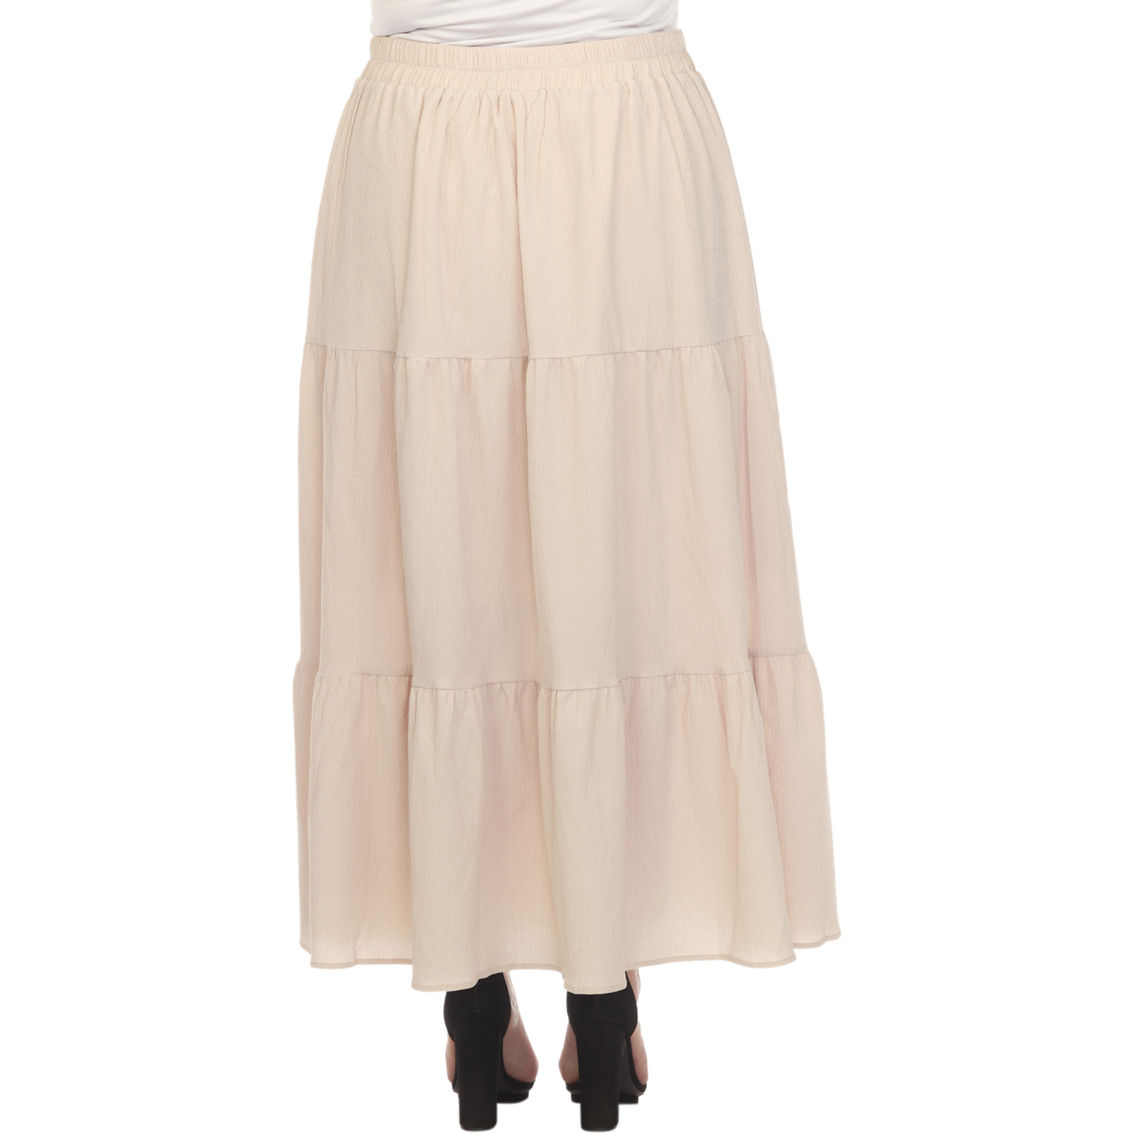 White Mark Plus Size Pleated Tiered Maxi Skirt - Image 2 of 5